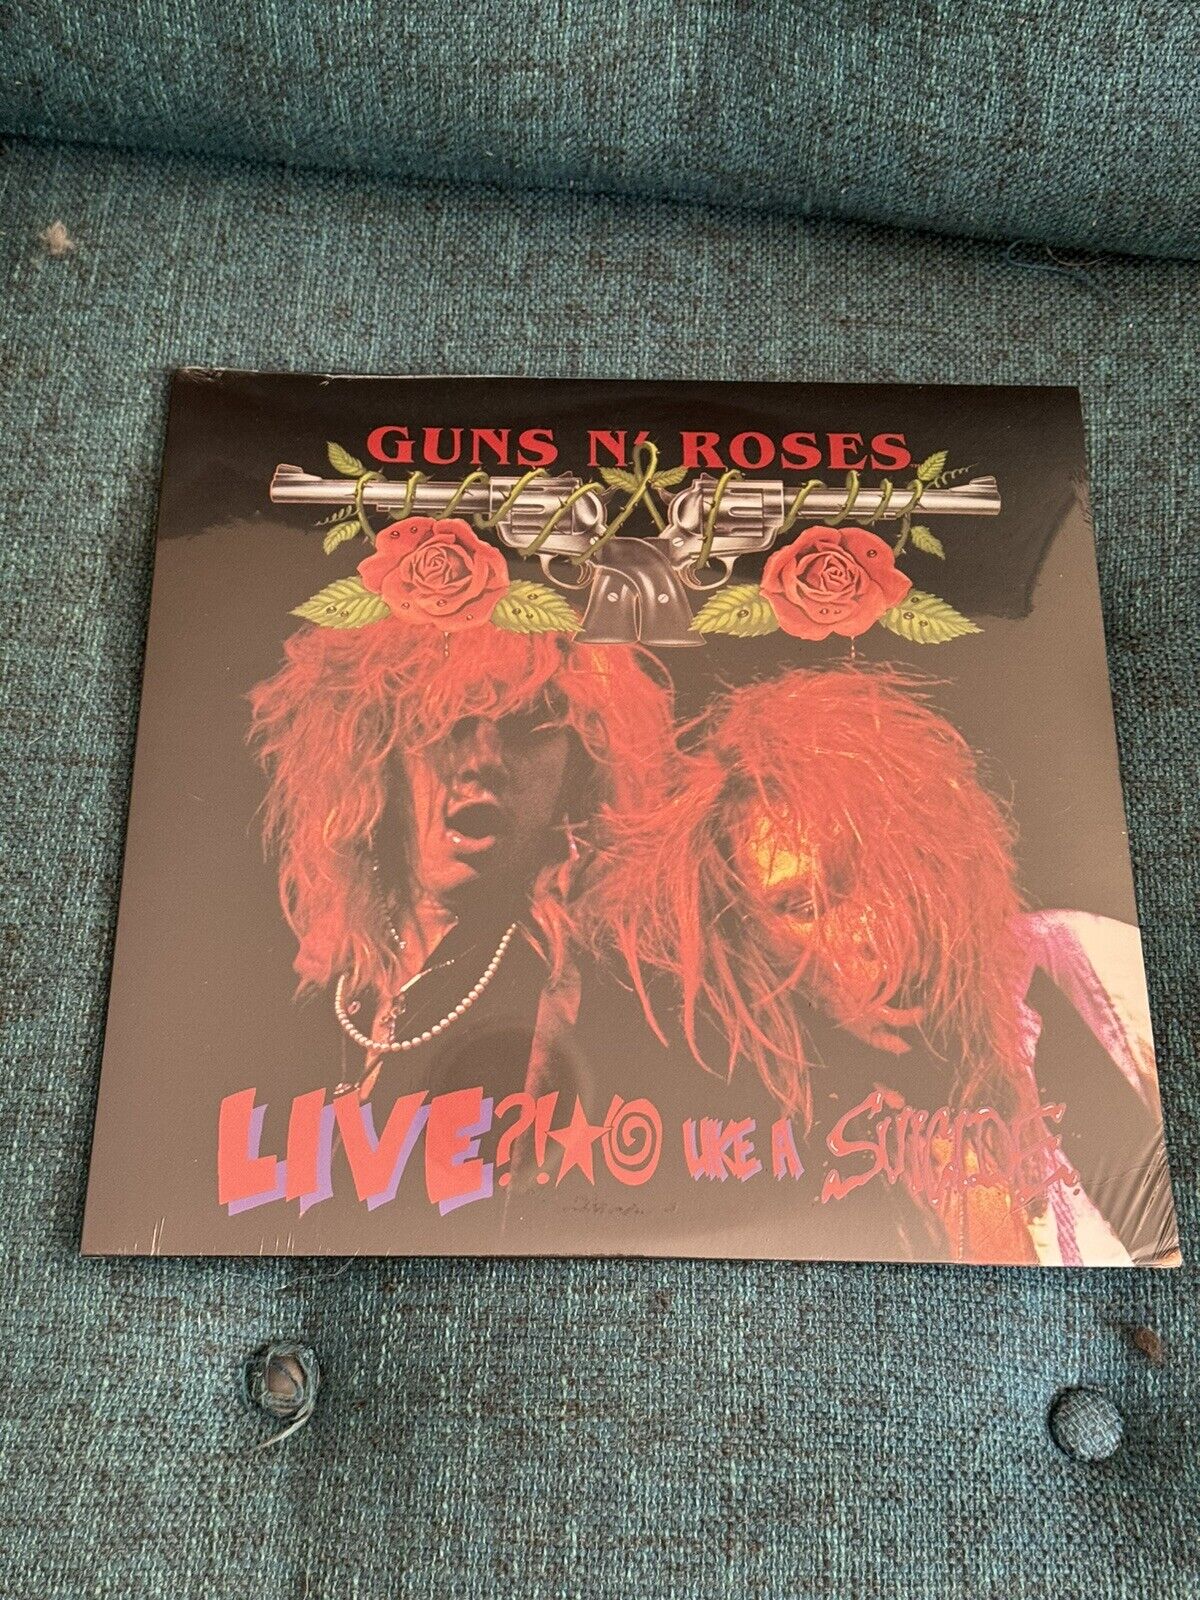 GUNS N ROSES Live Like A Suicide - Locked N Loaded - Vinyl New/Sealed Rare